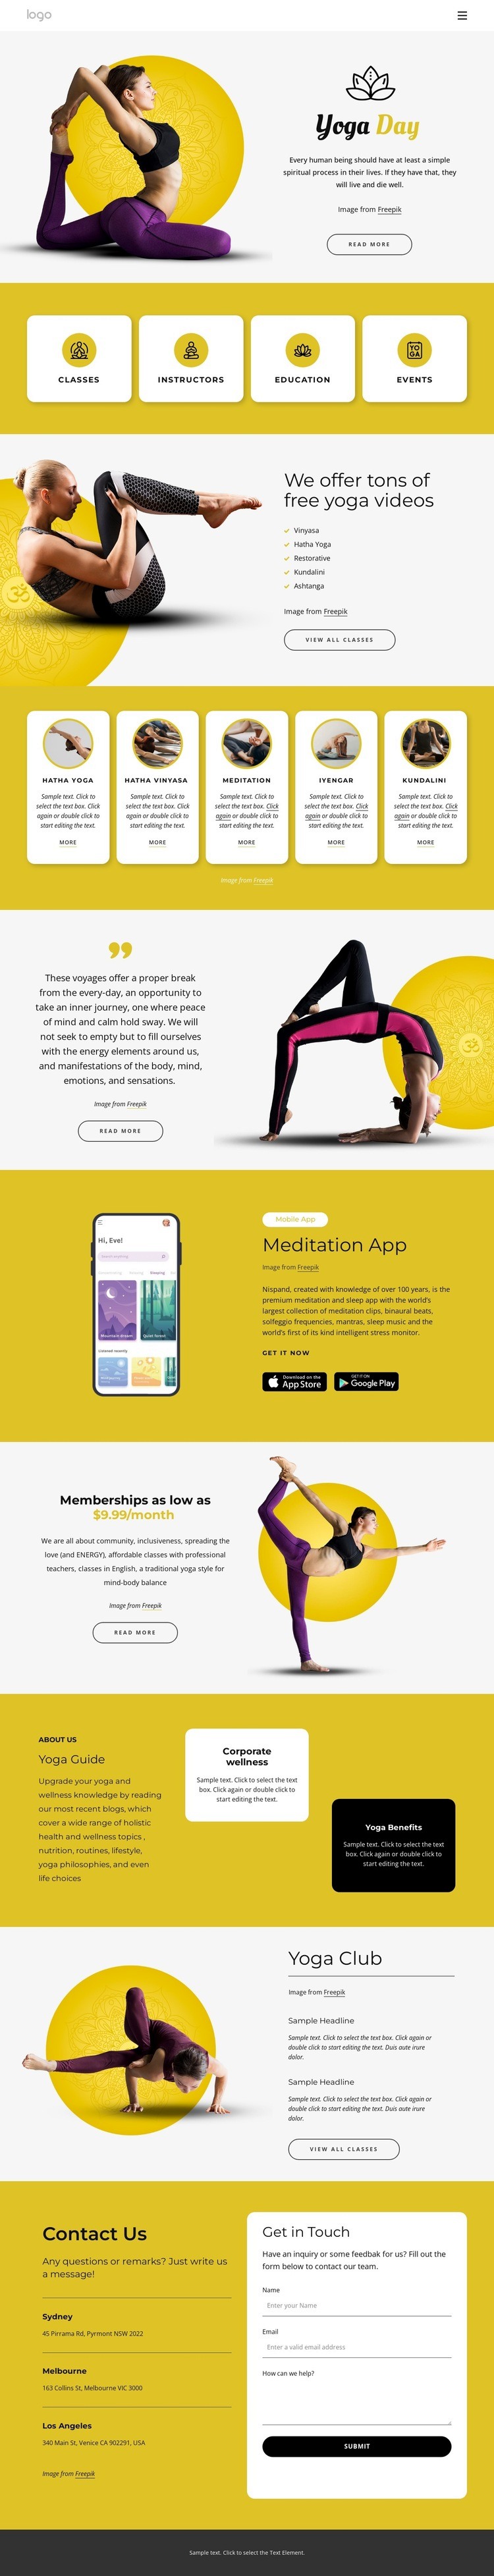 Yoga events and classes Webflow Template Alternative